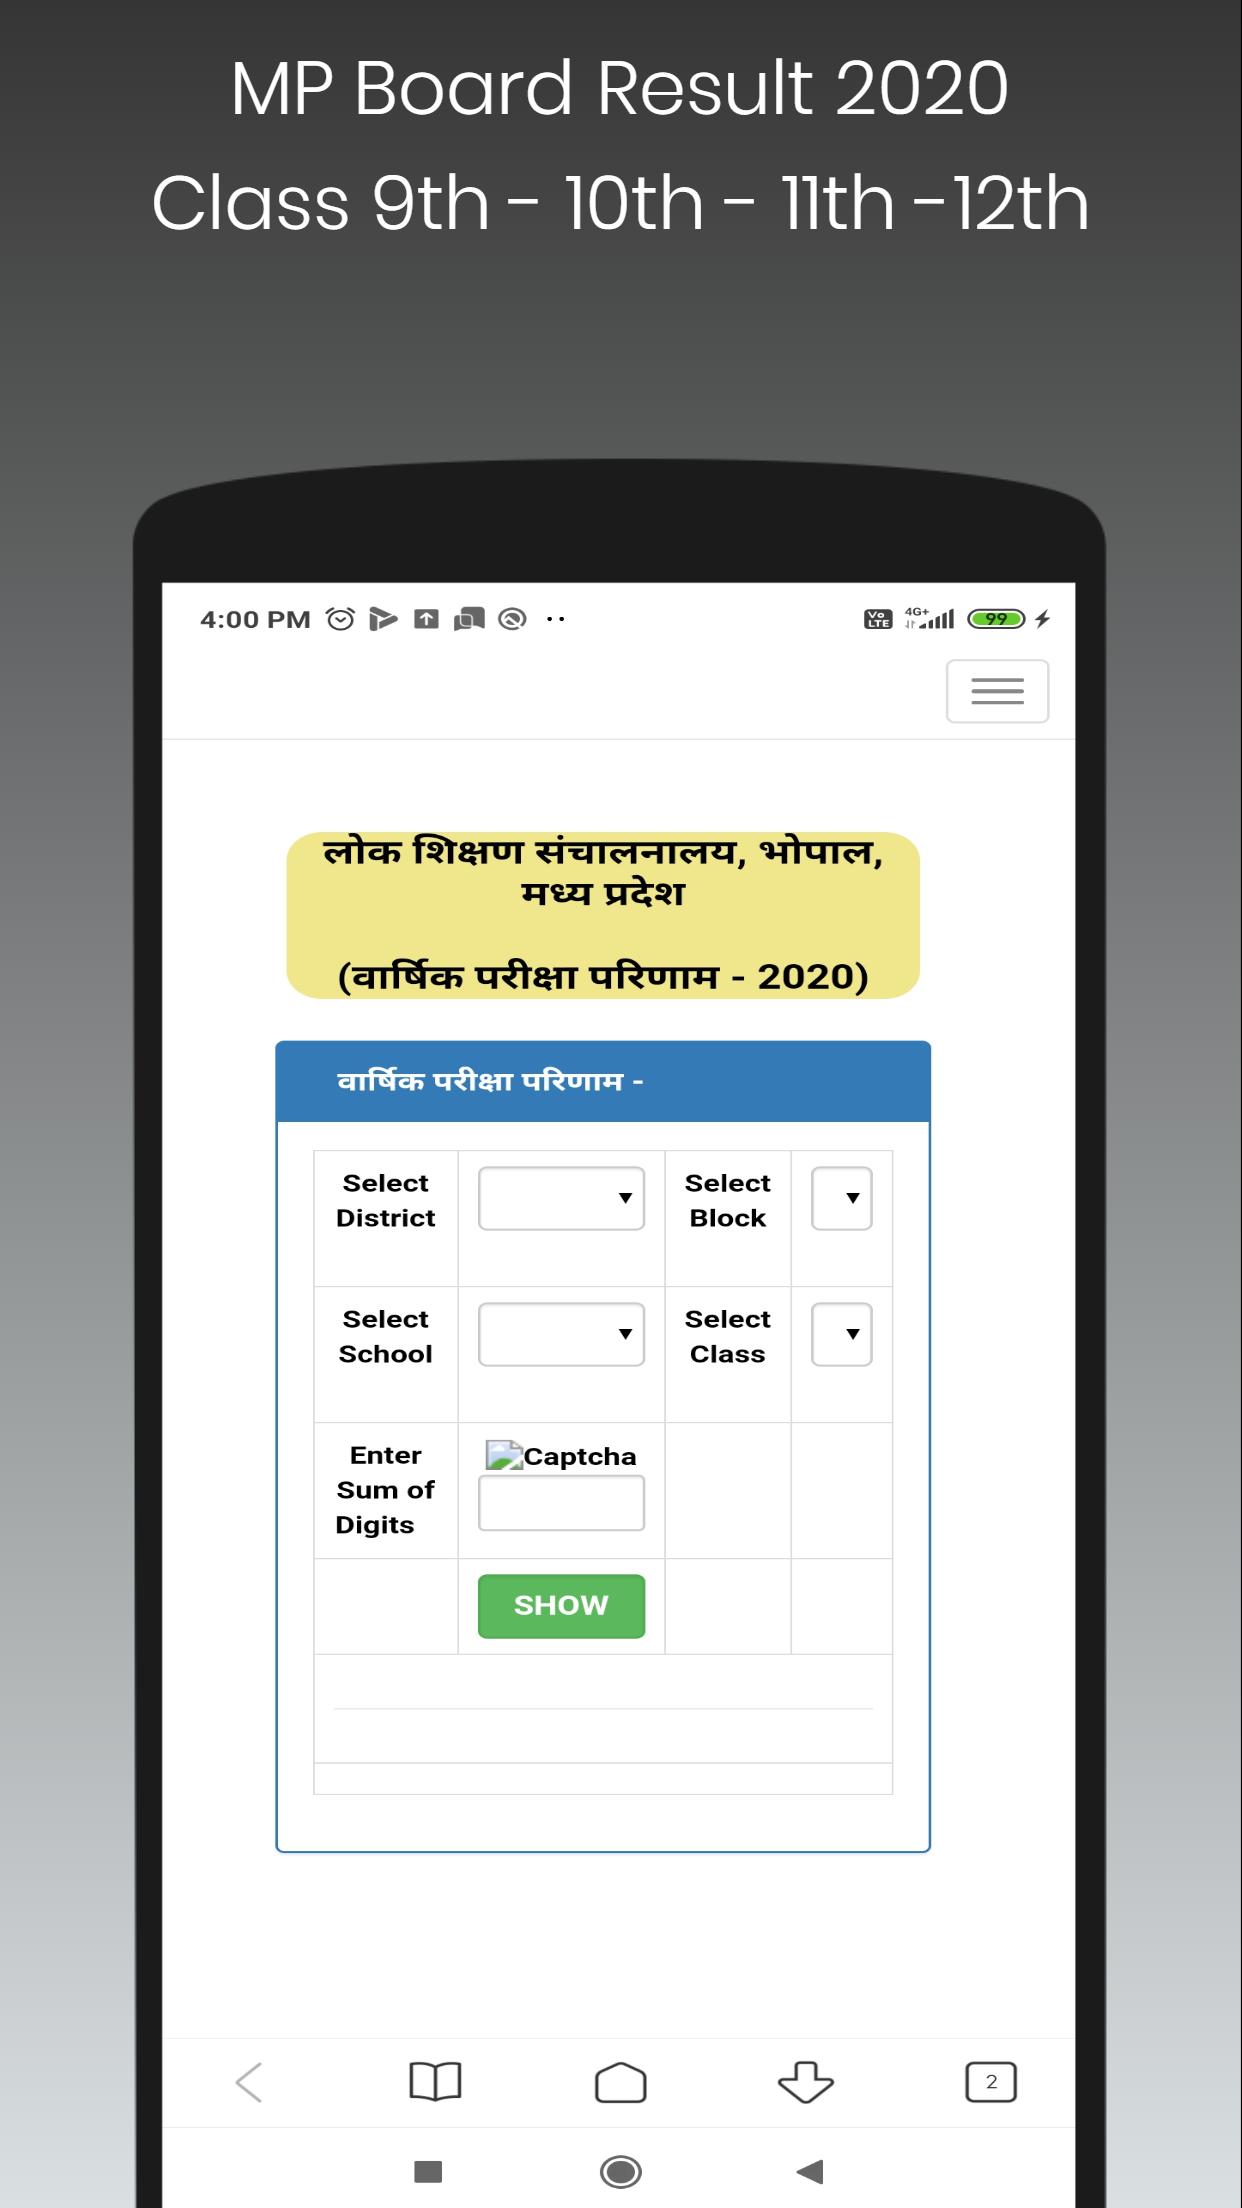 Mp Board Mpbse Time Table Admit Card Result 21 For Android Apk Download